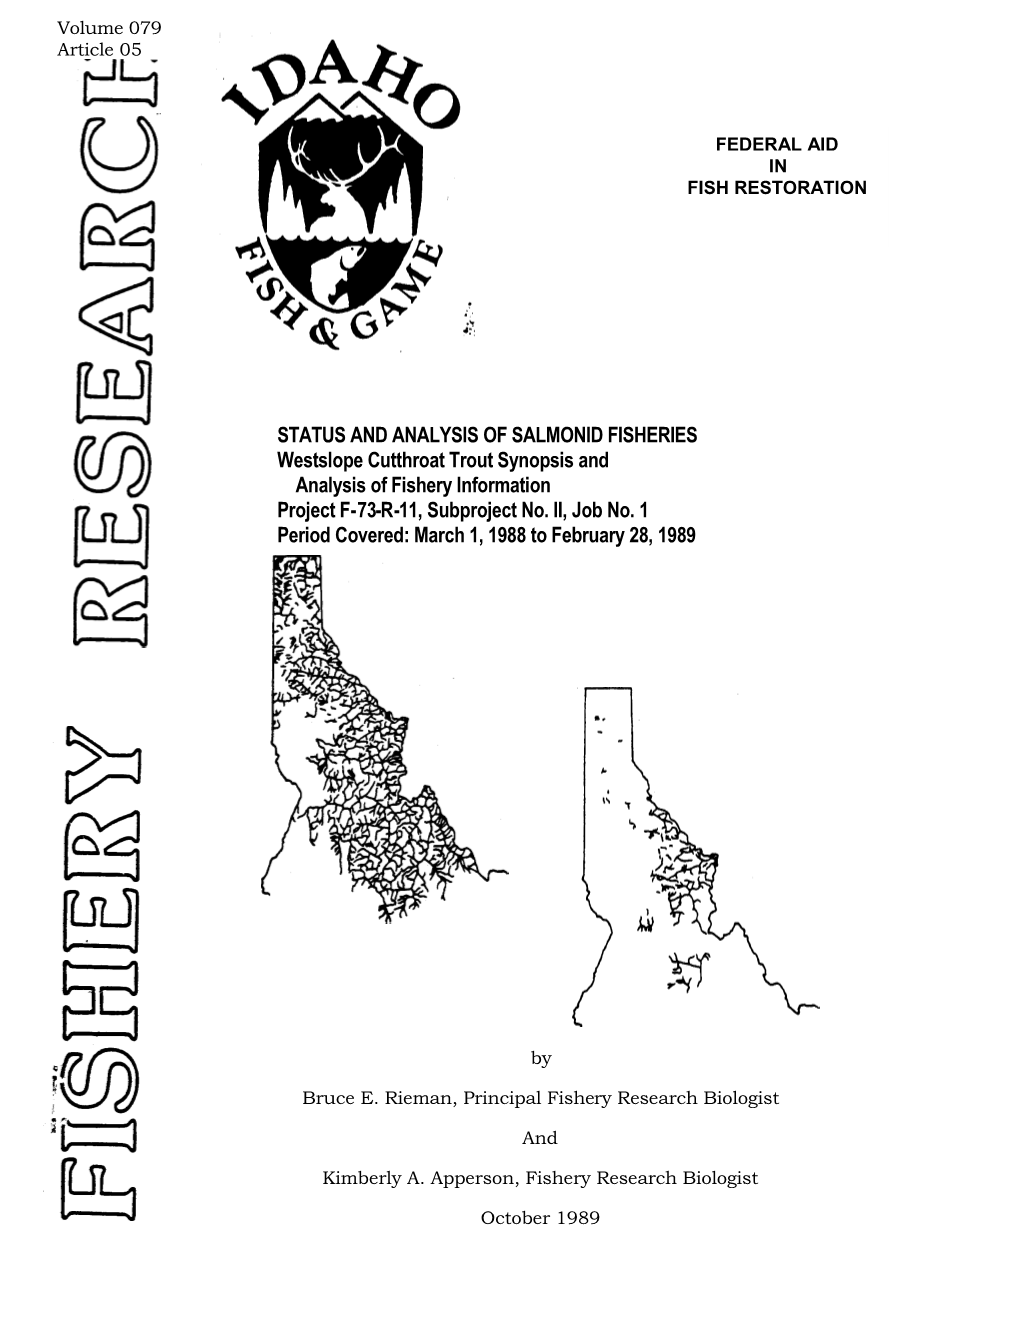 Westslope Cutthroat Trout Synopsis and Analysis of Fishery Information Project F-73-R-11, Subproject No